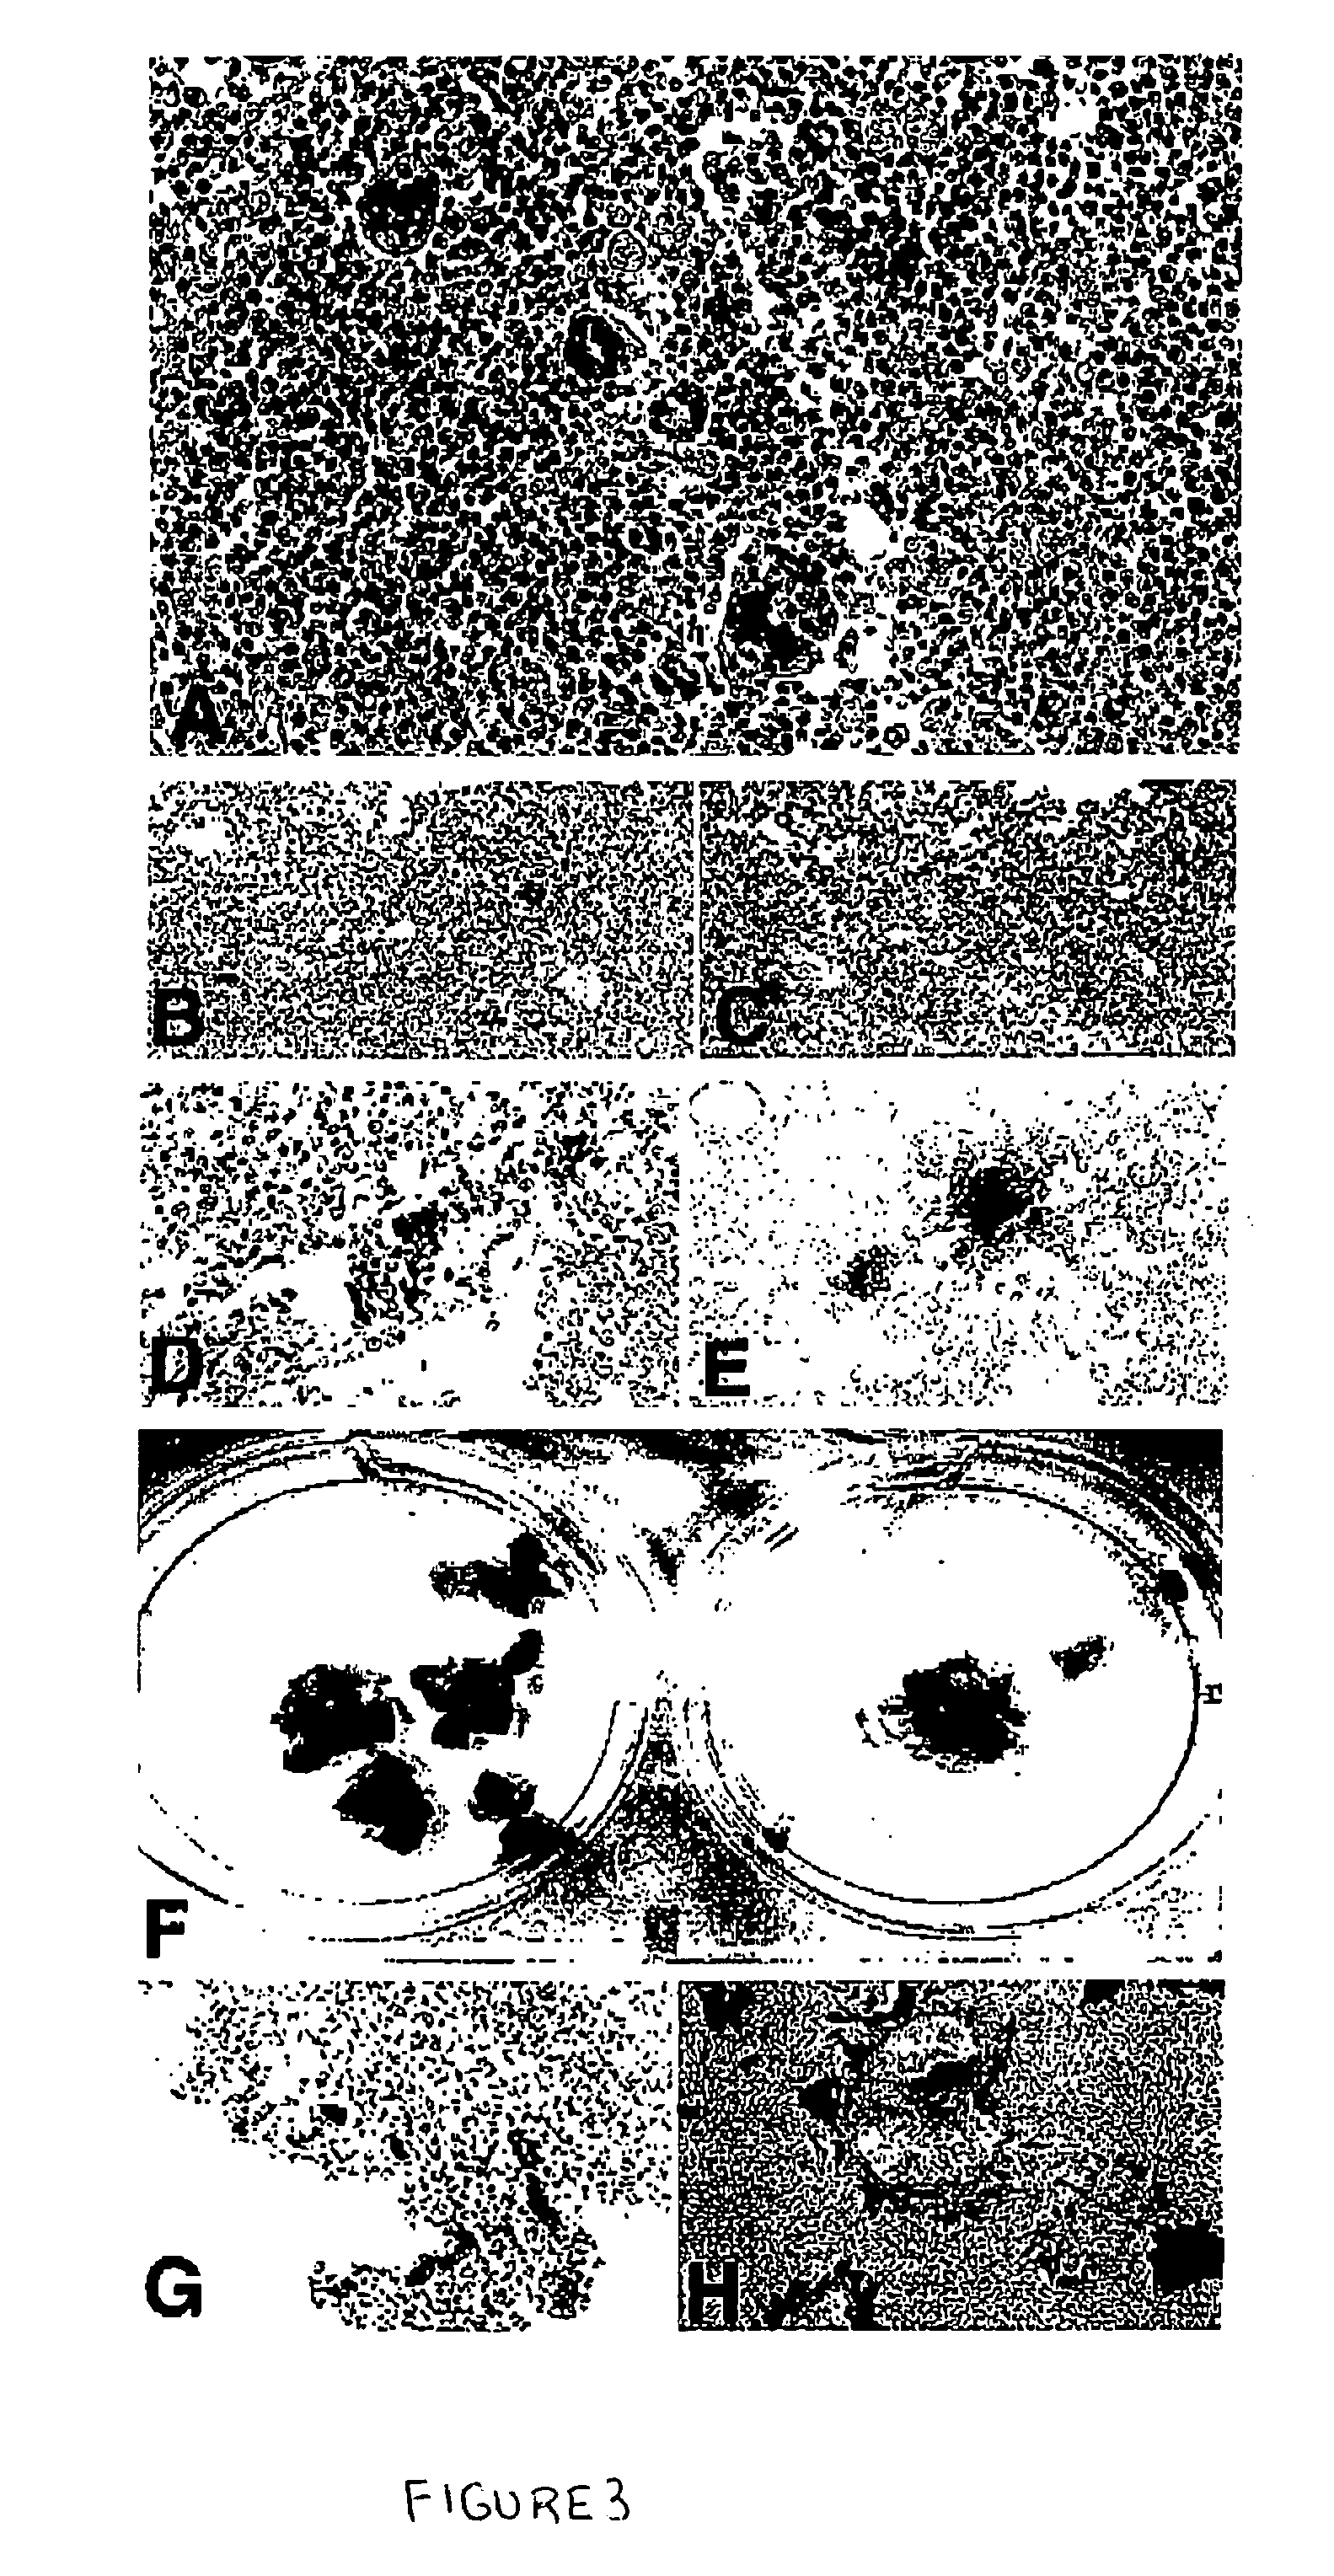 Method for limiting the growth of cancer cells using an attenuated measles virus